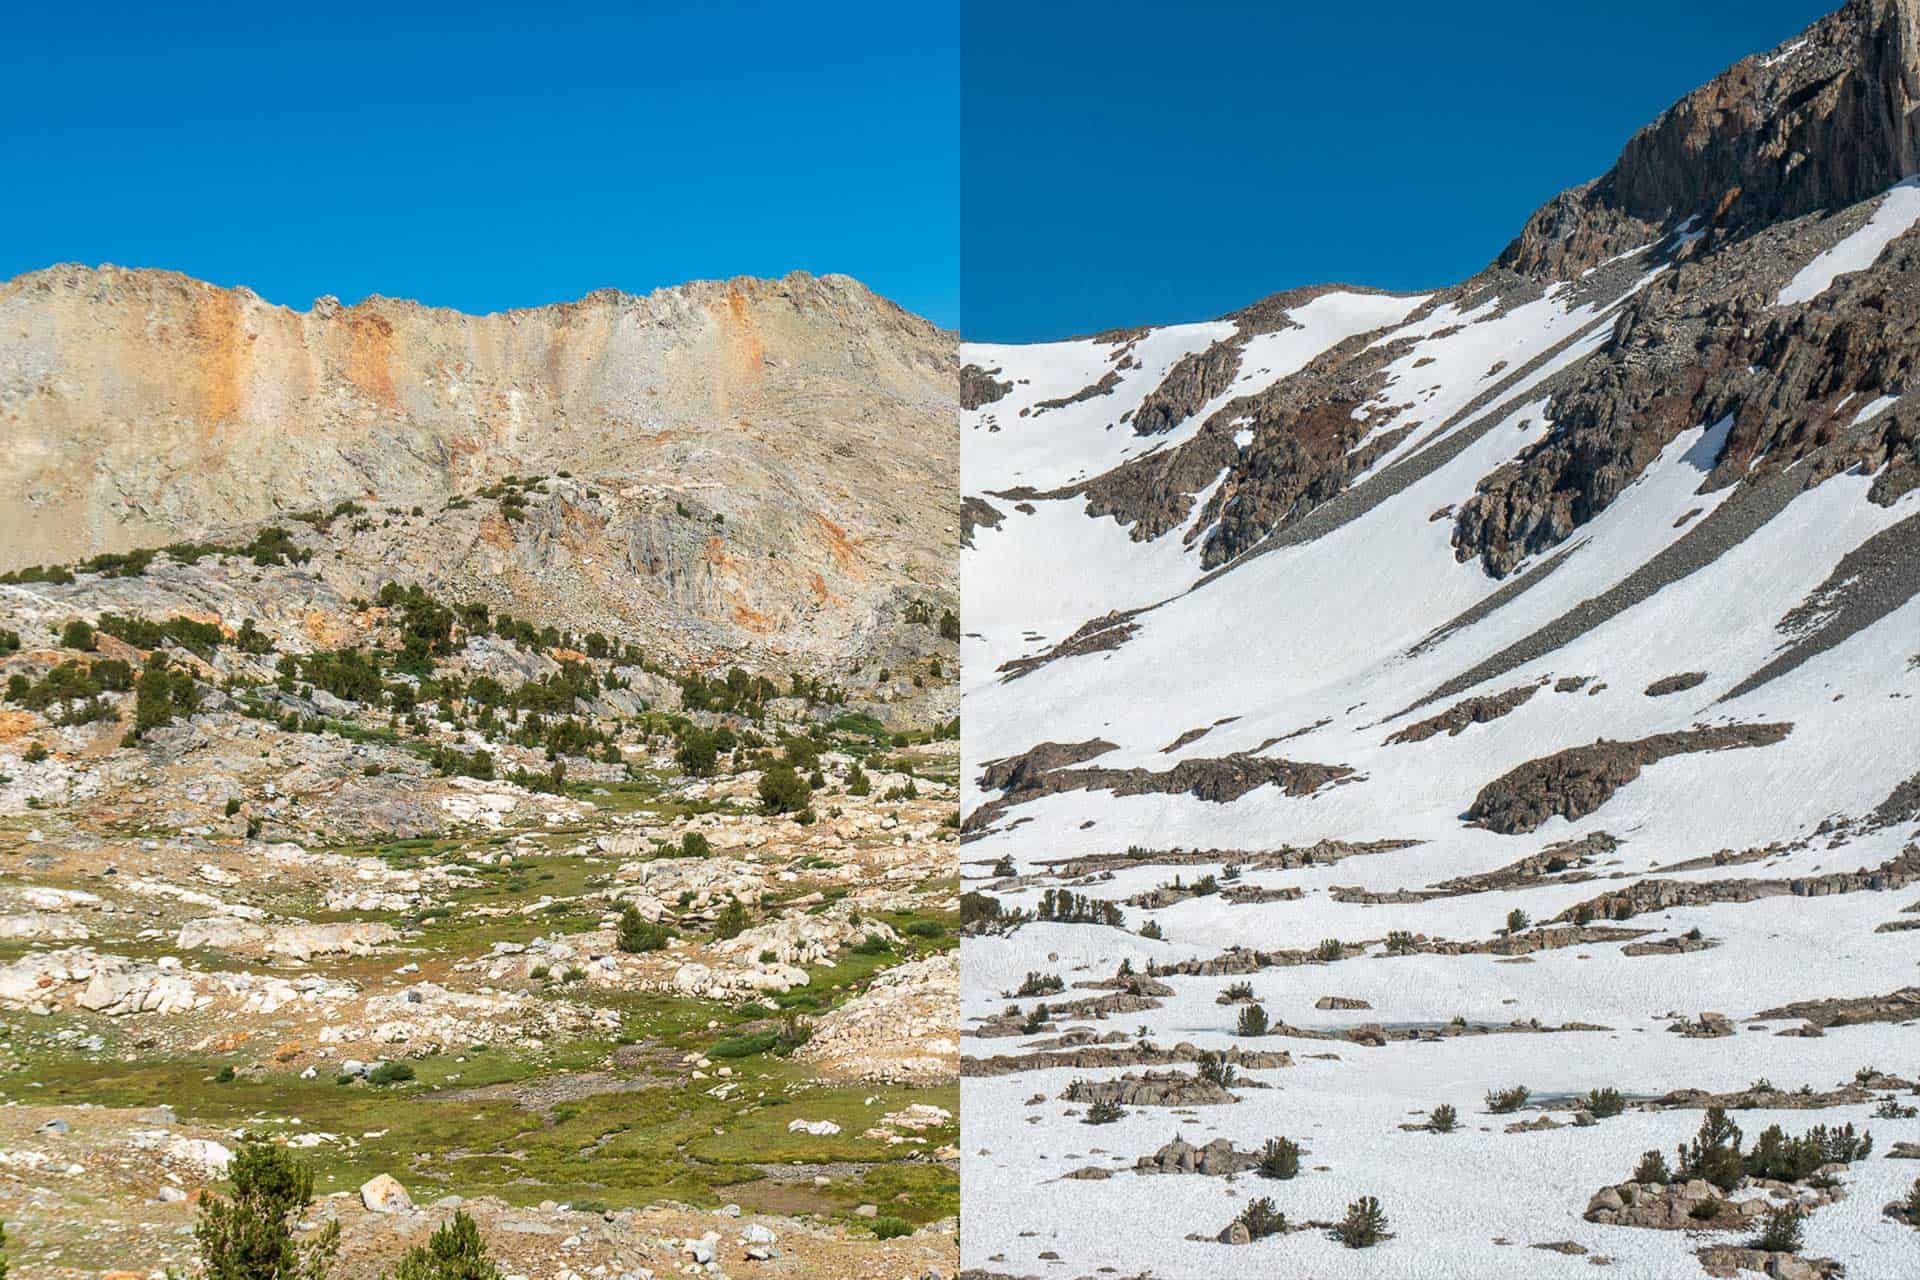 Pinchot Pass Guide: Approaches, Crossing, and Snow